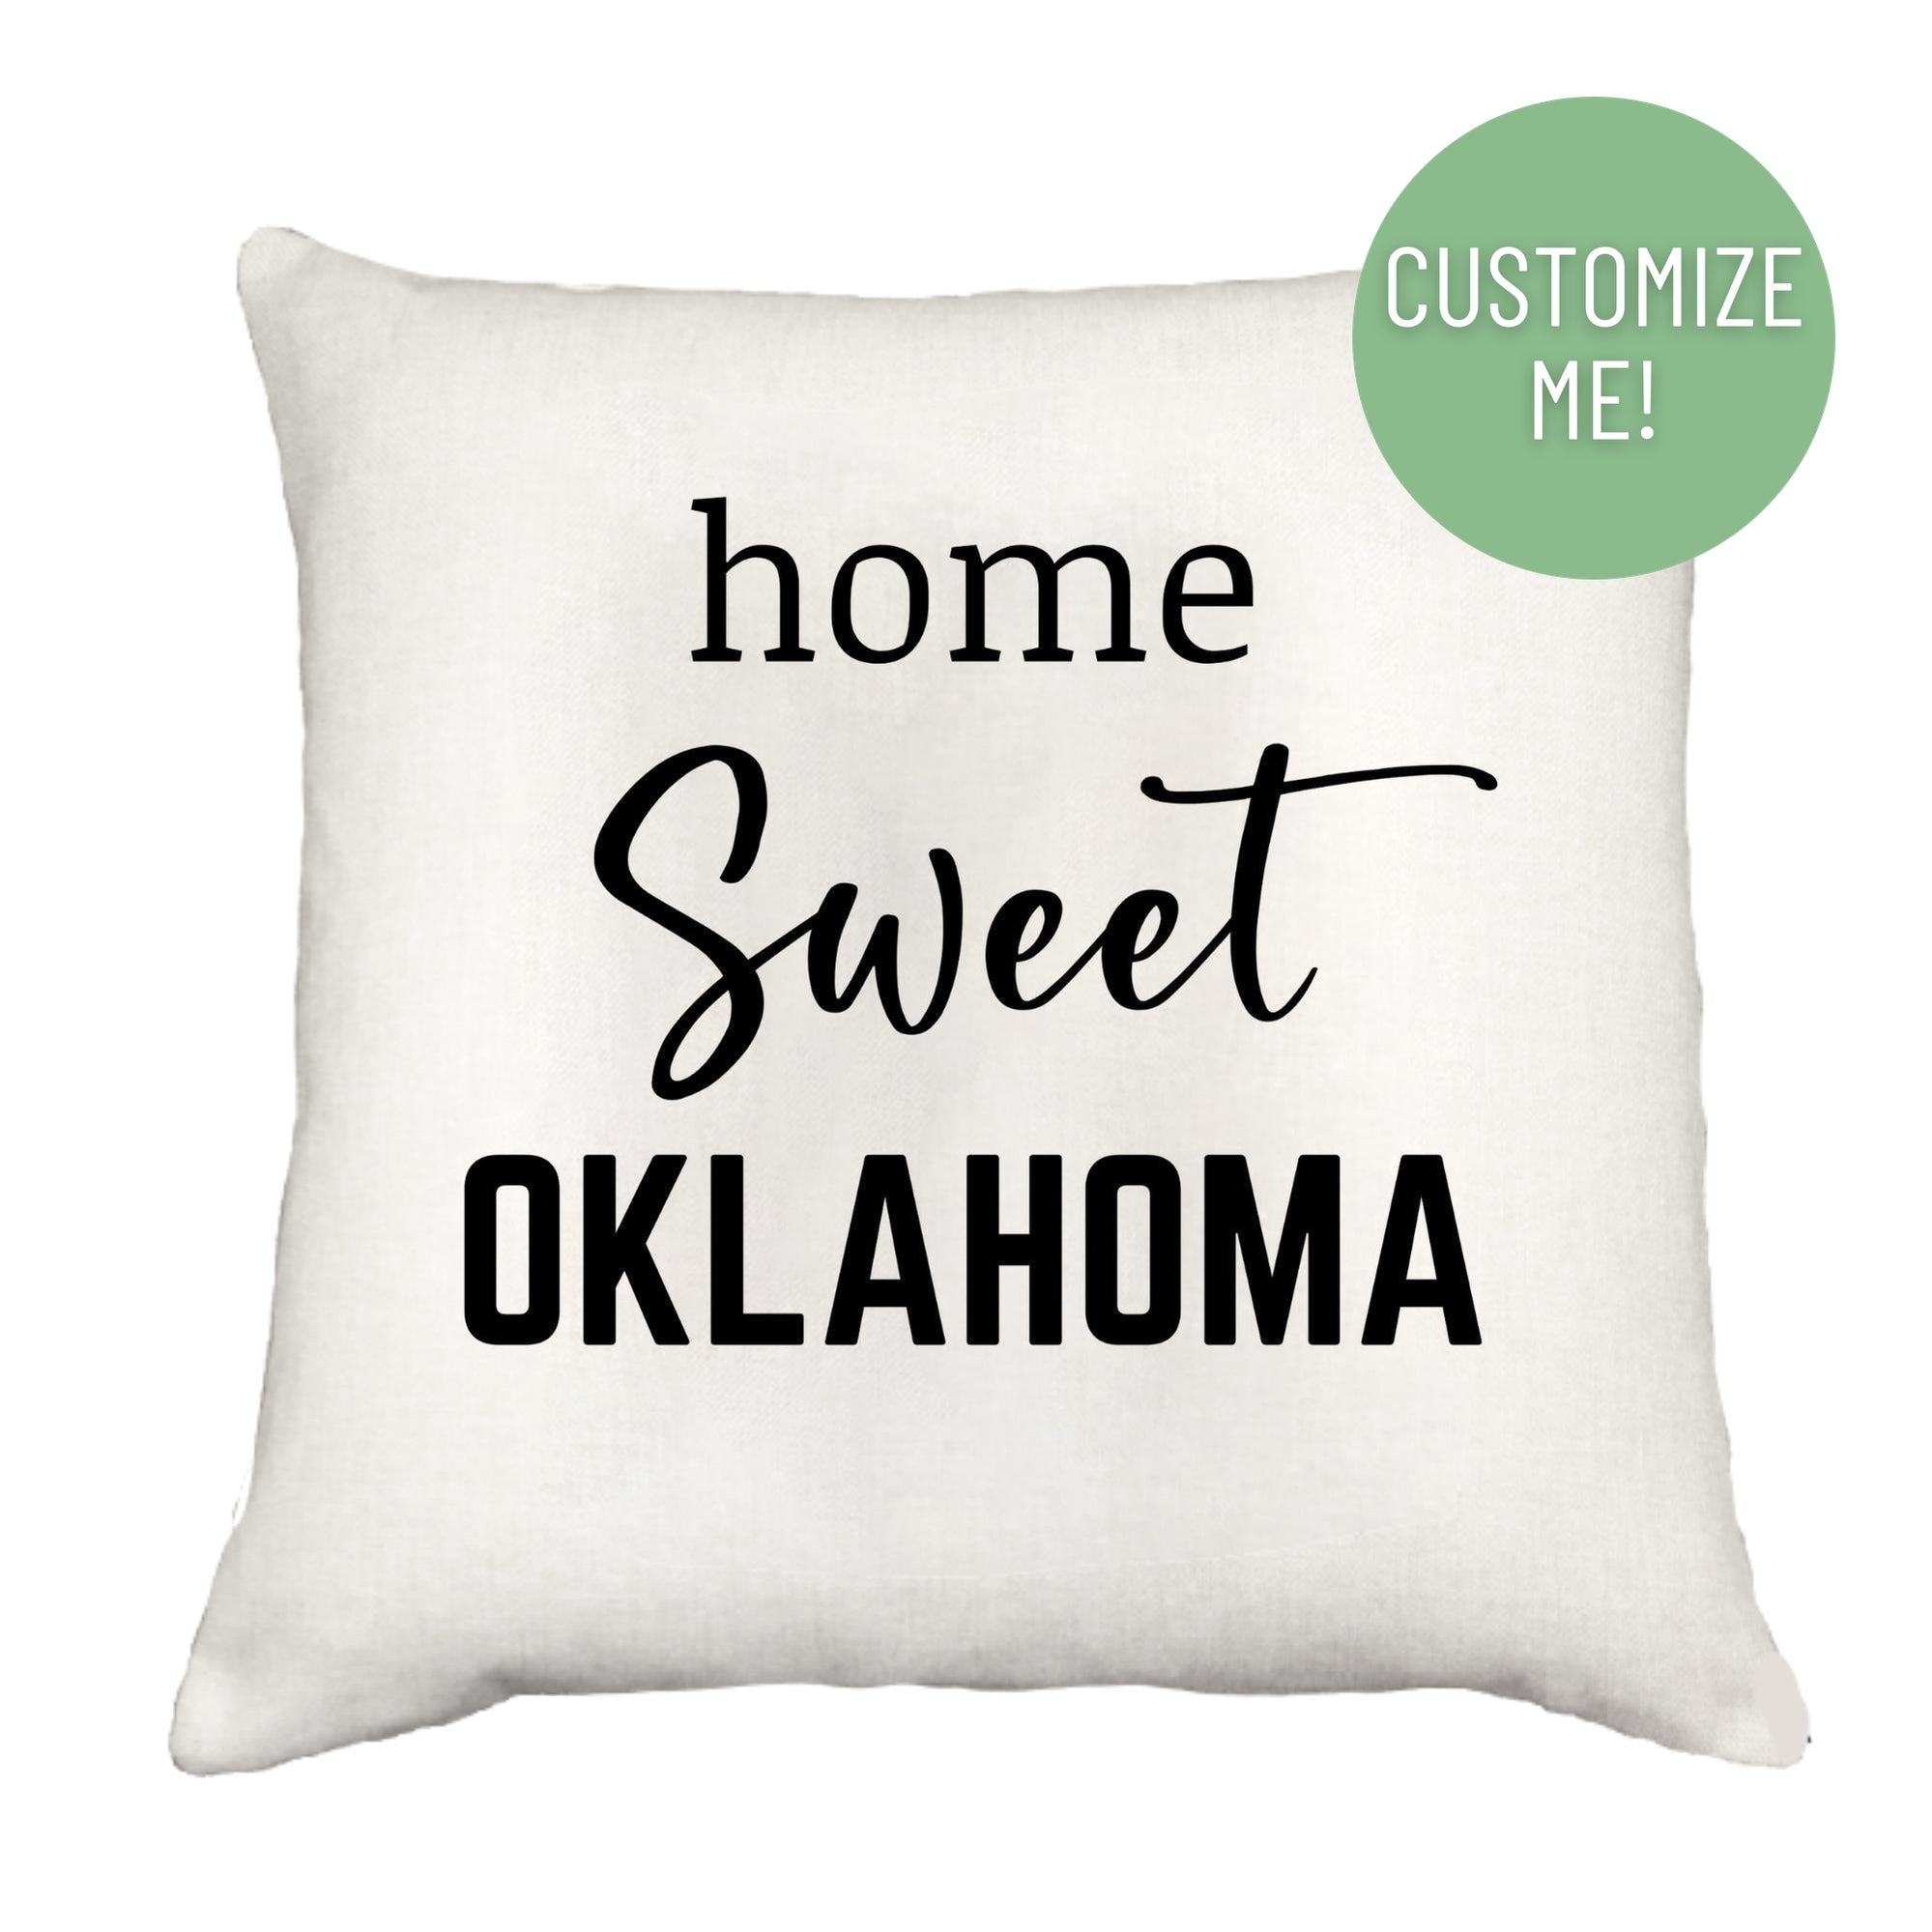 Home Sweet State Down Pillow Throw Pillow - Southern Sisters